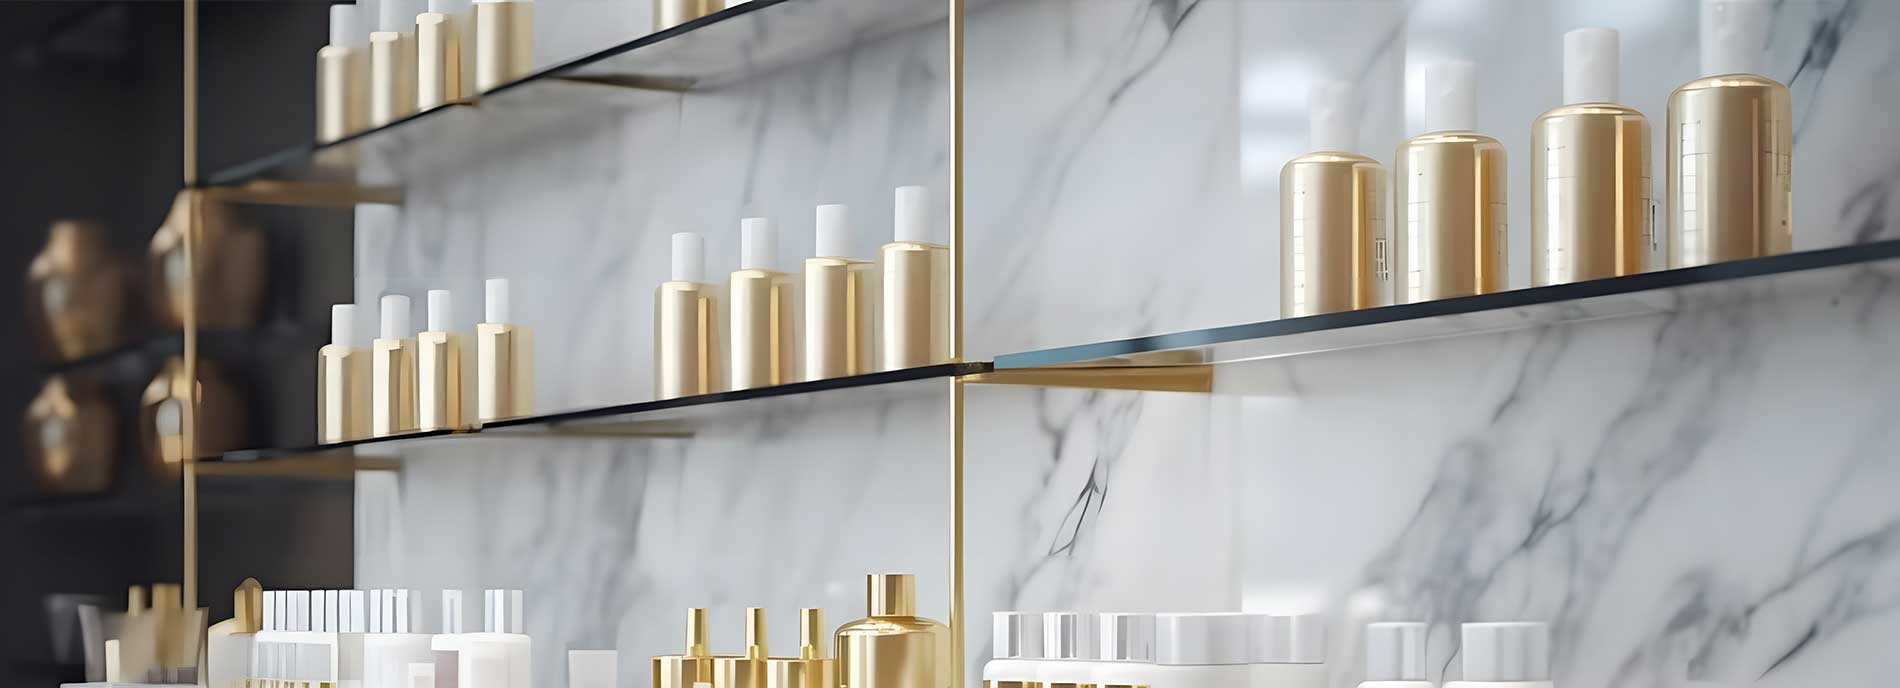 glass shelves with gold colored bottles closeup